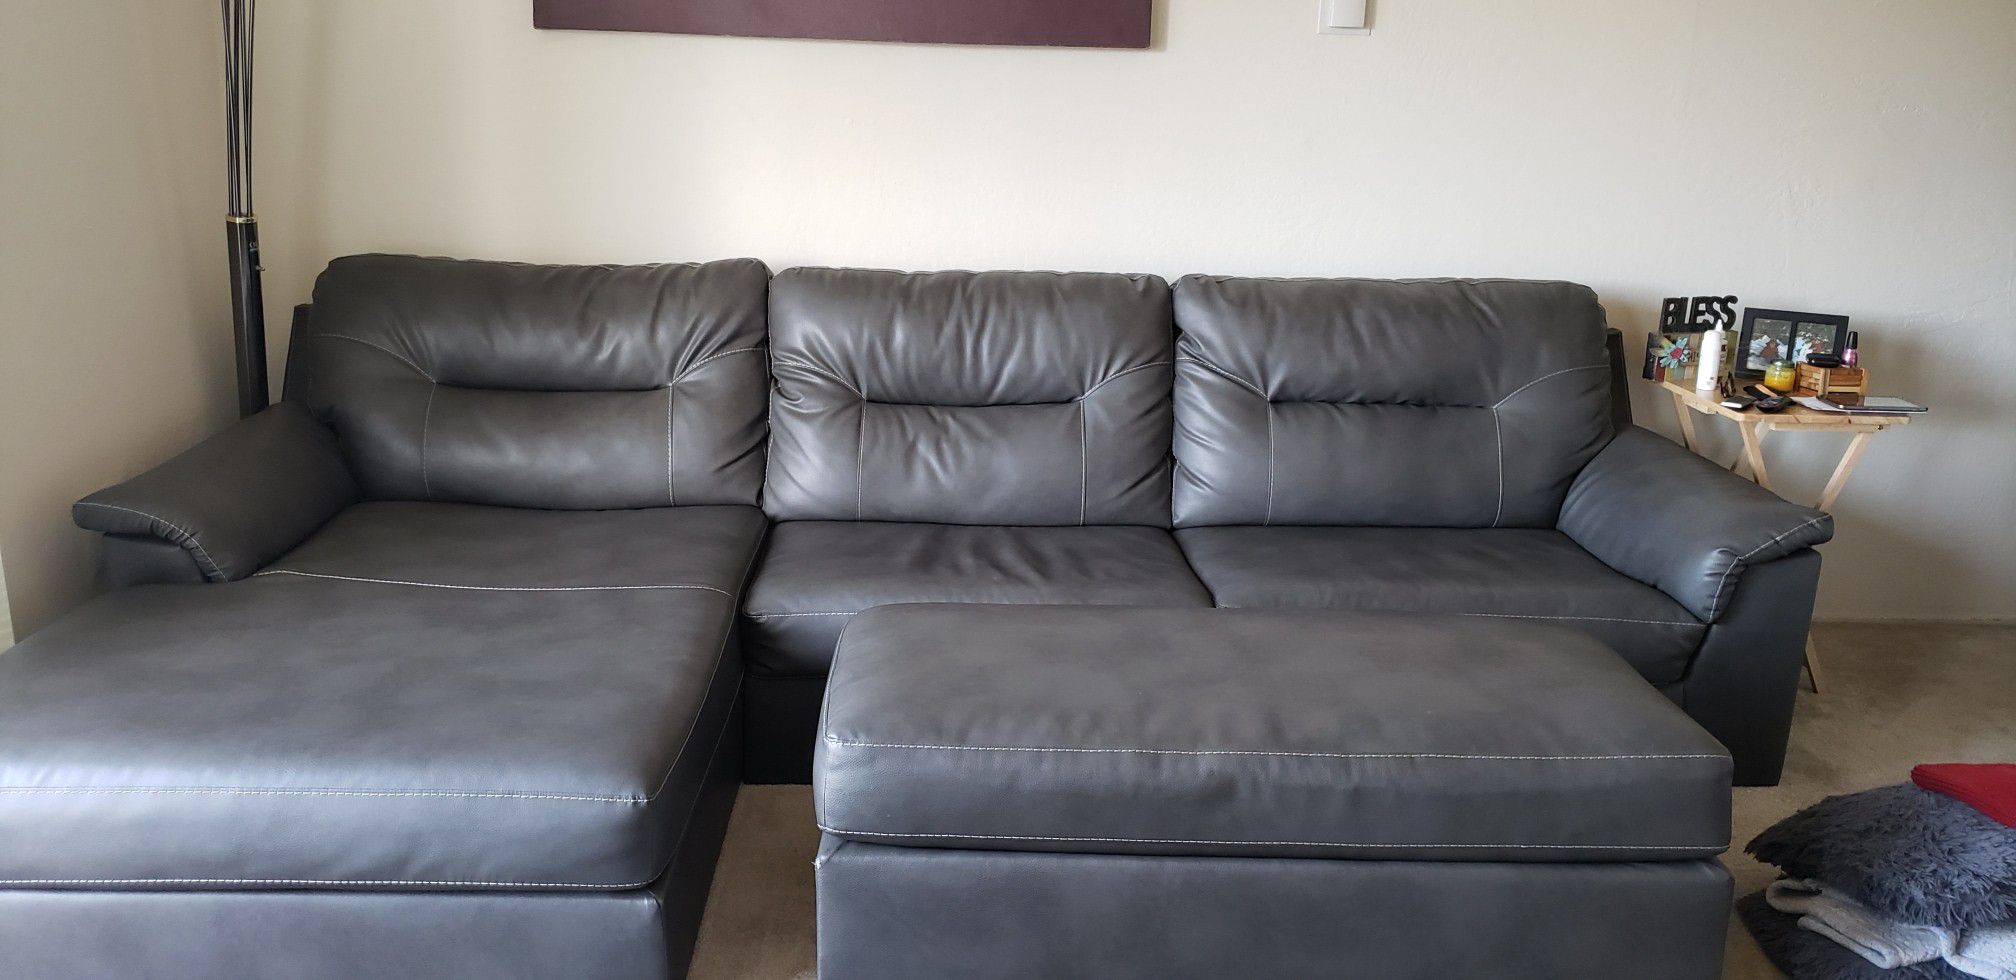 Ashley Furniture 10' couch 450 OBO